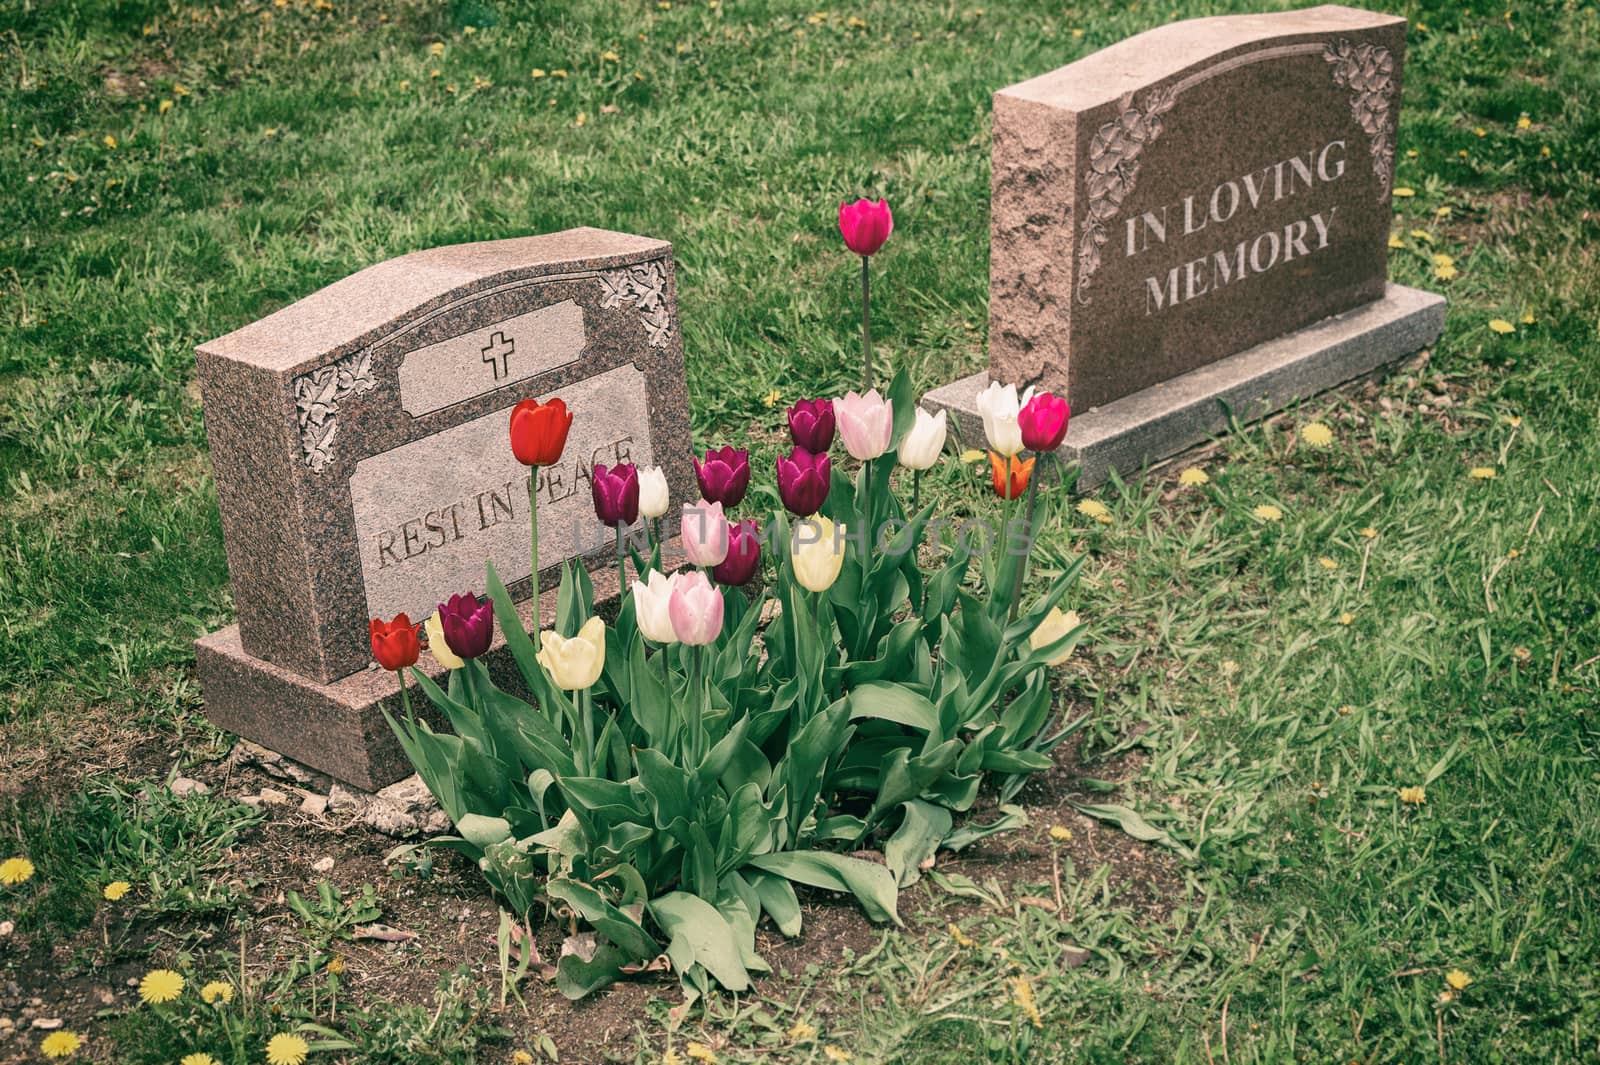 Headstones in a cemetery with many tulips